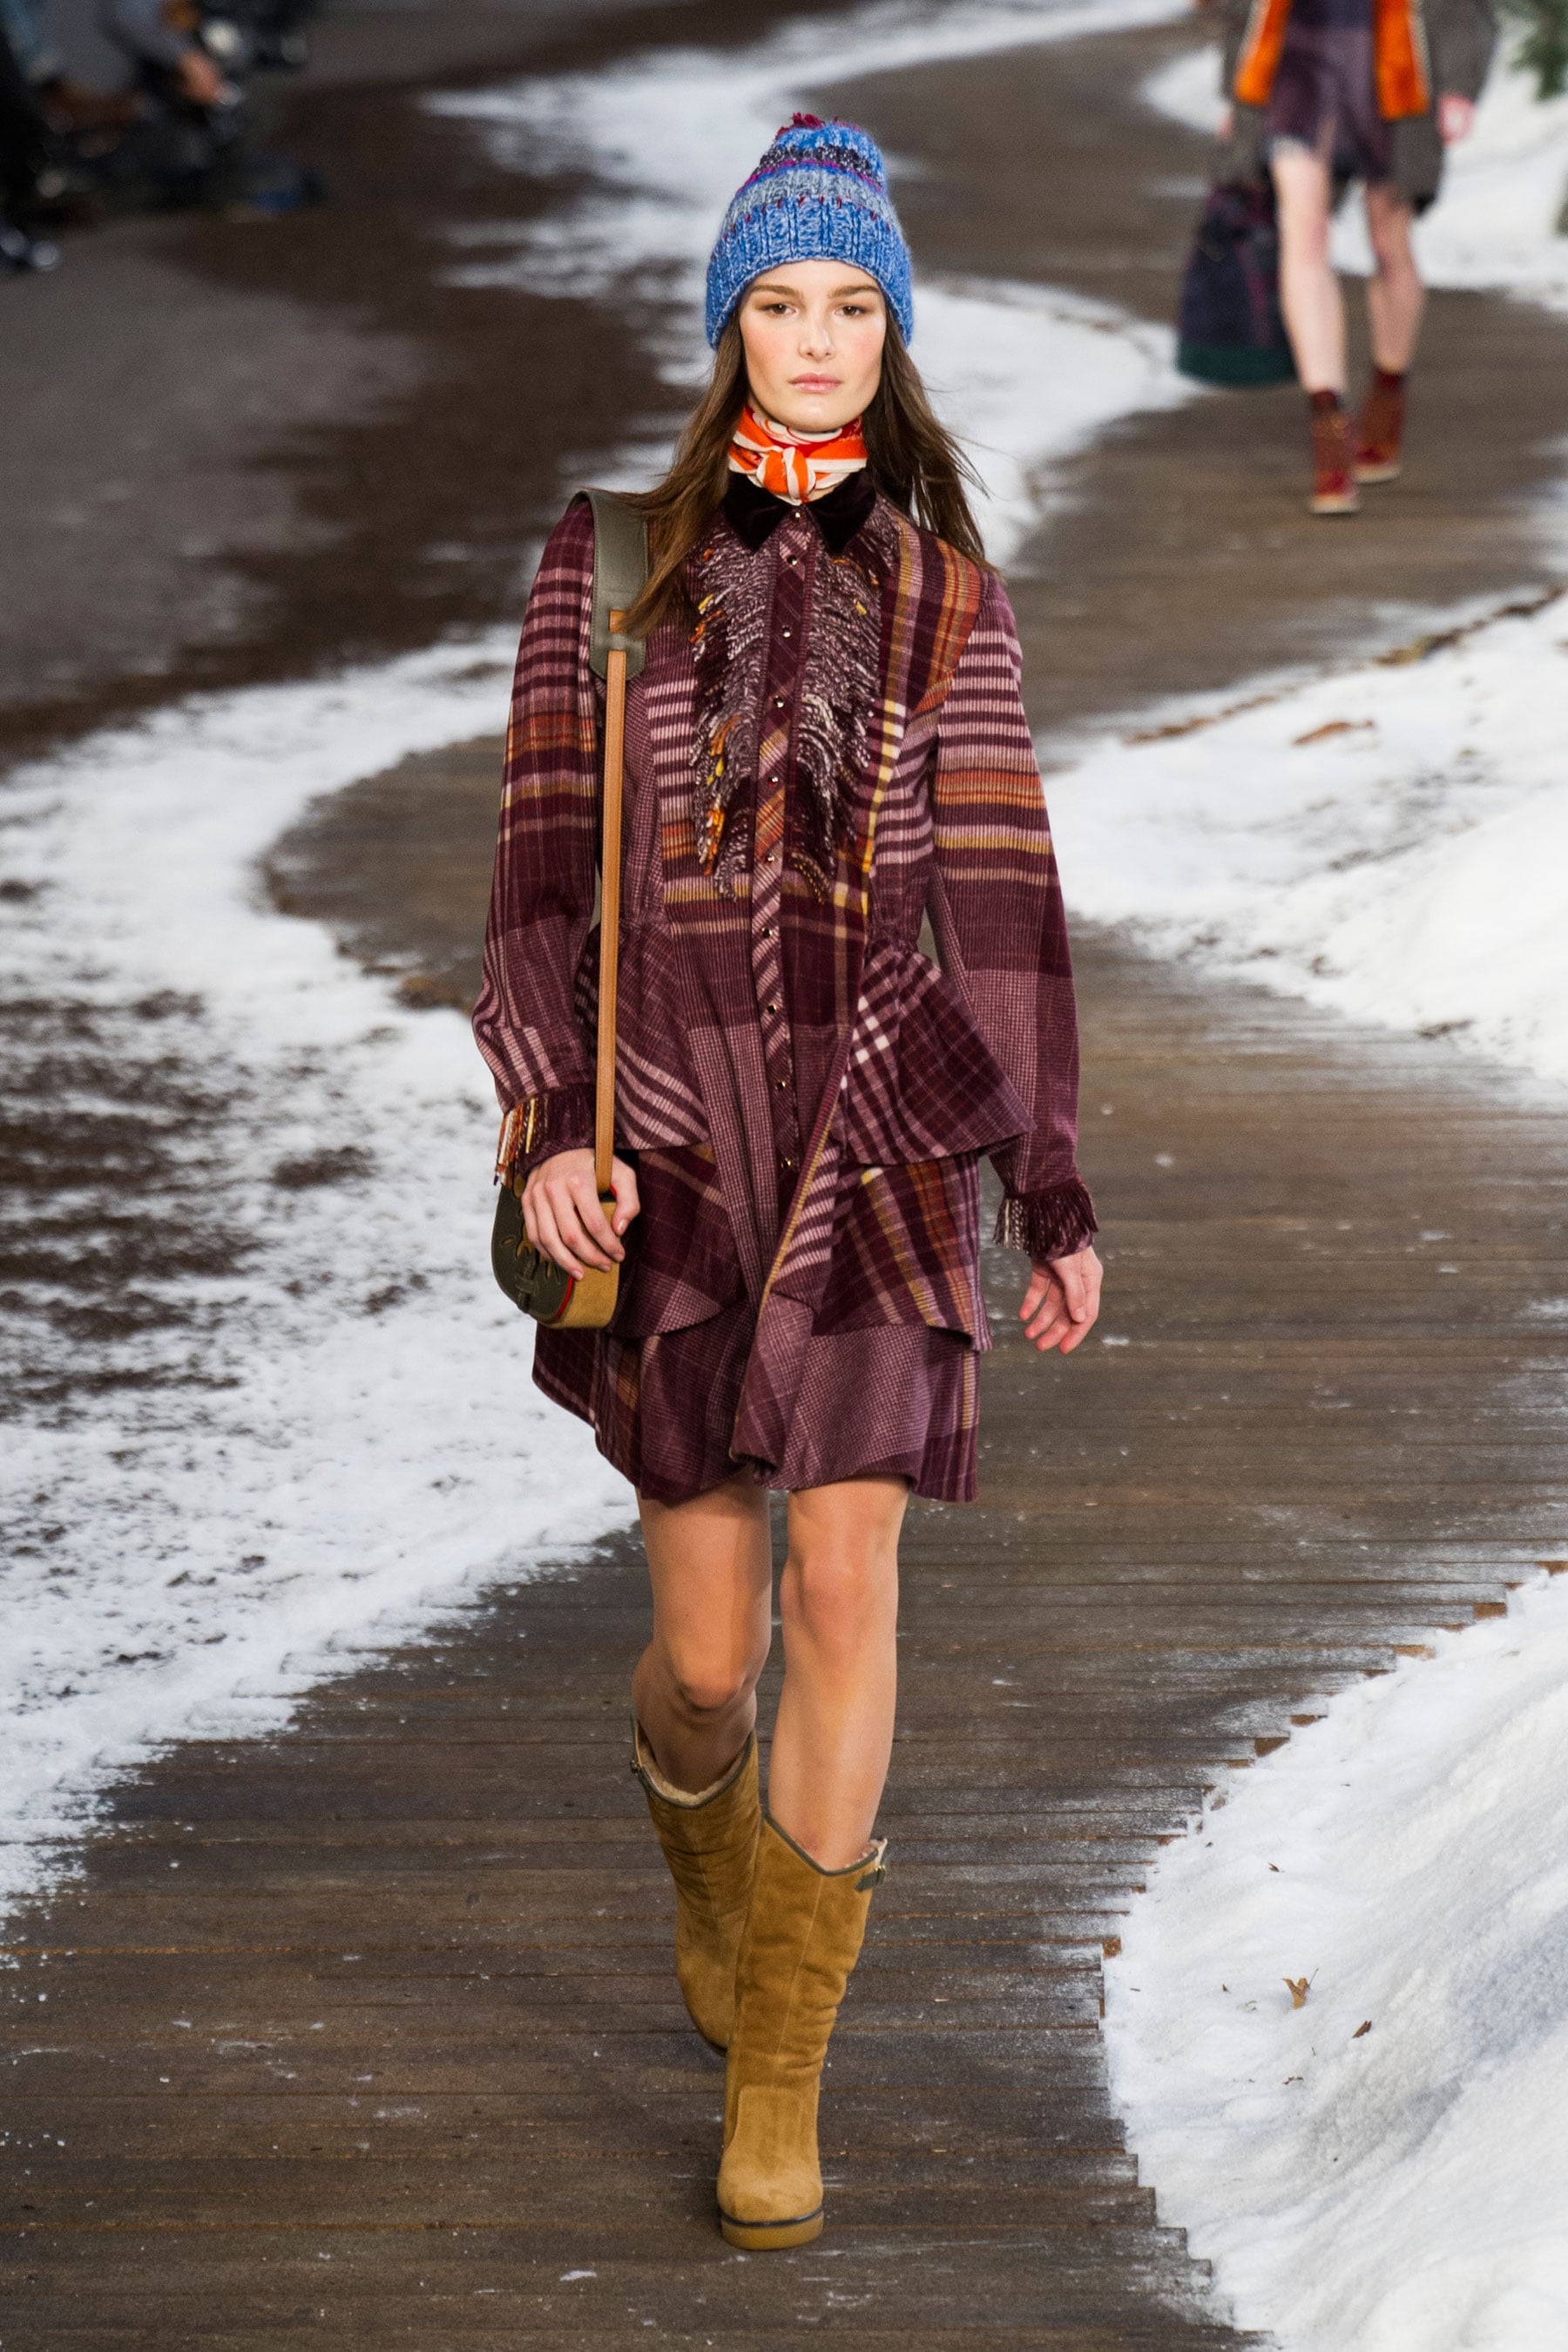 Tommy Hilfiger Fall 2014 | We Want to Do More Than Après-Ski With Tommy Hilfiger | Fashion Photo 5